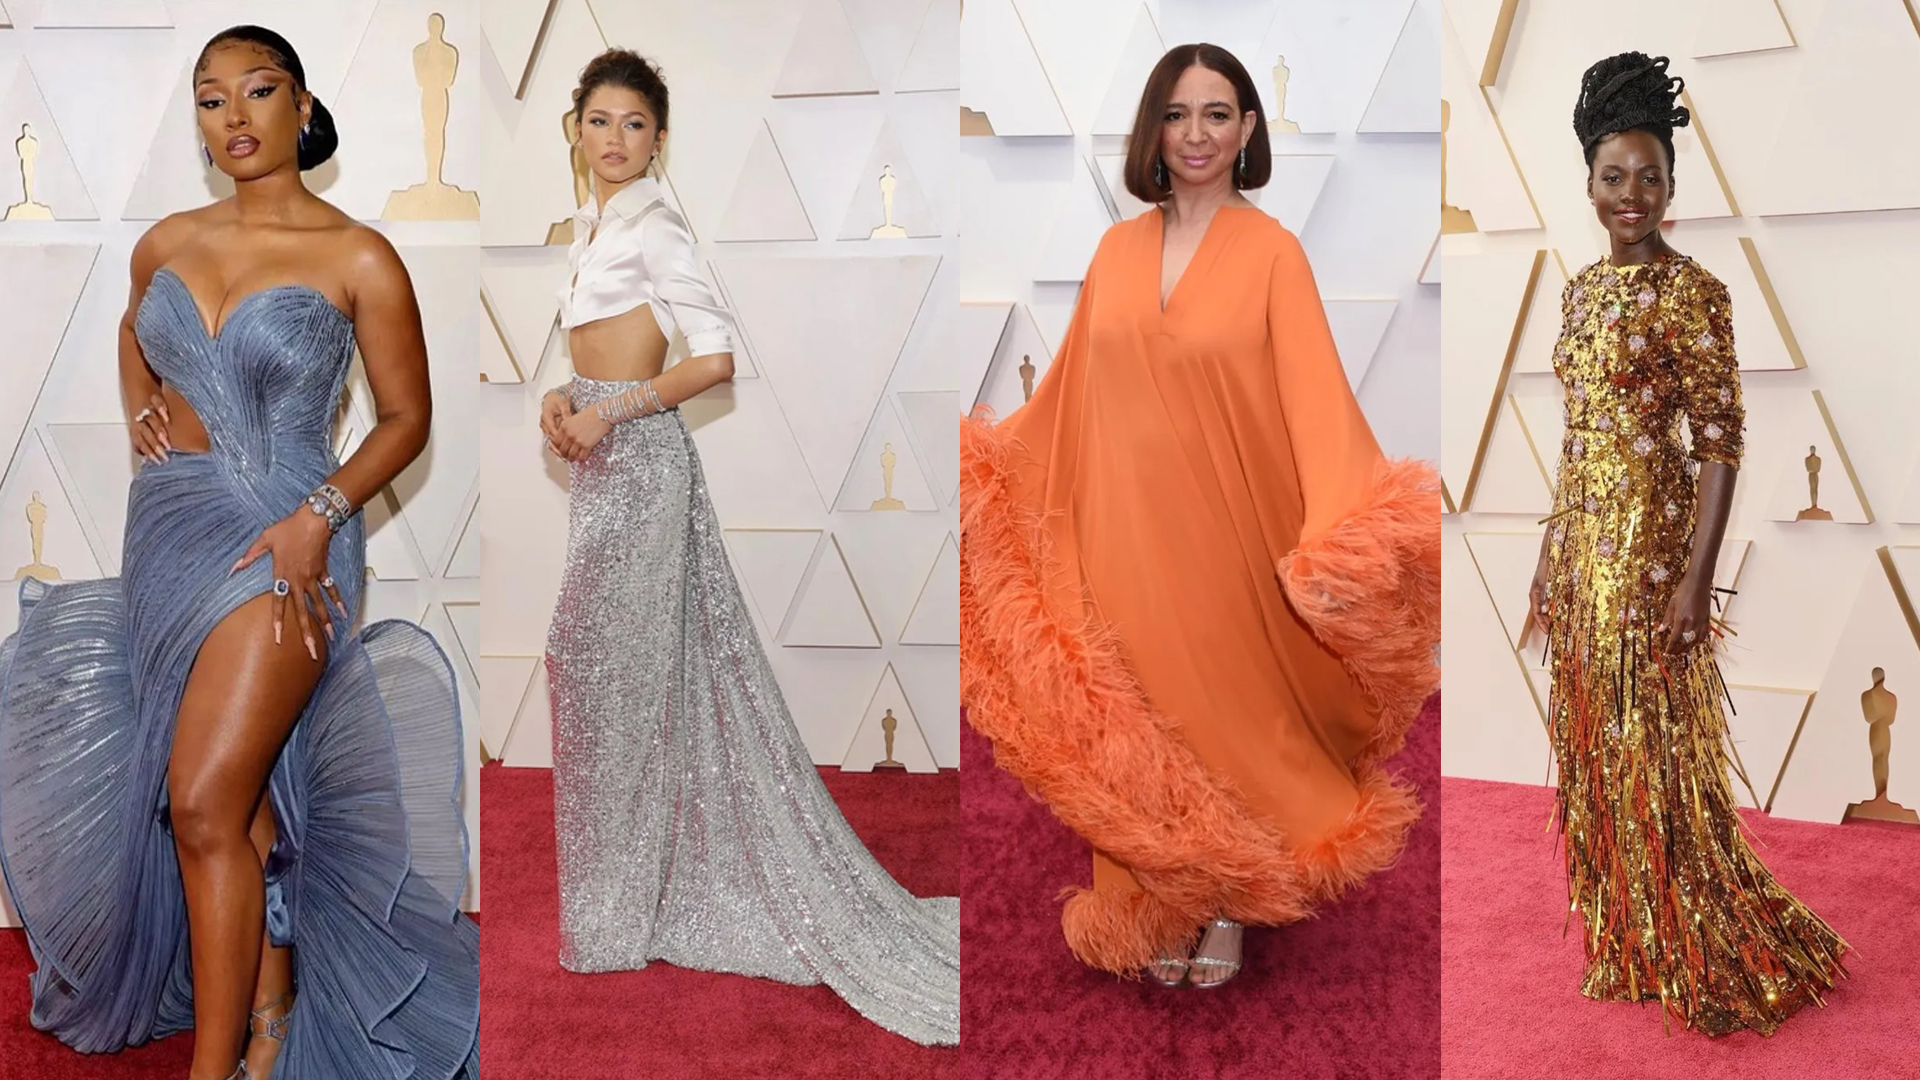 This year's Oscar fashion was elegant and refined